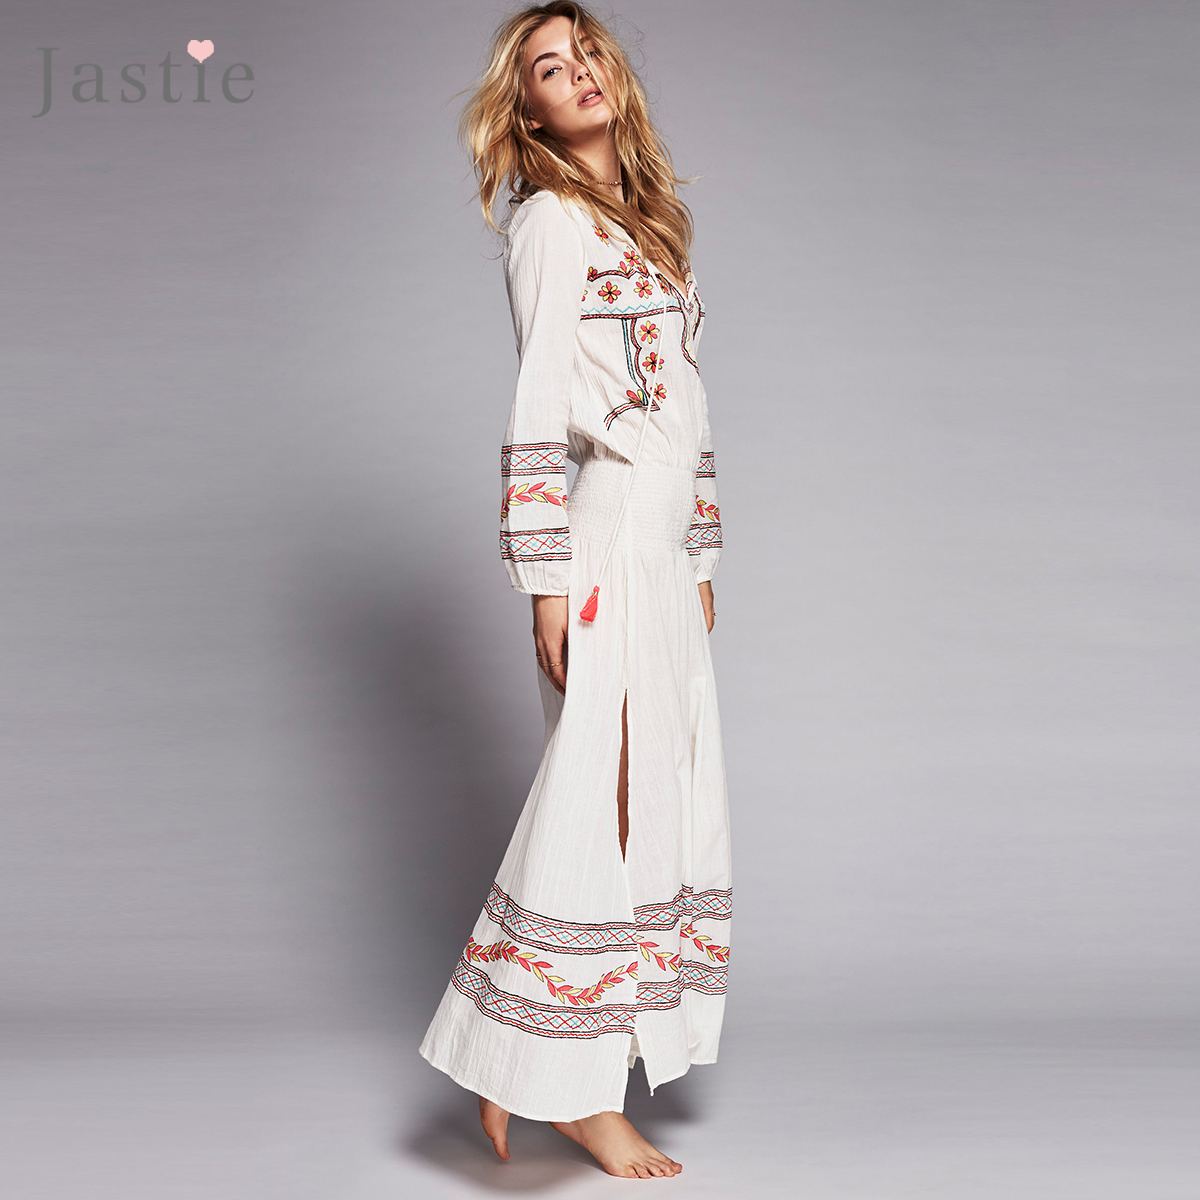 Jastie Mystical Maxi Dress Colorful Embroidery Women Dress Long Sleeve ...